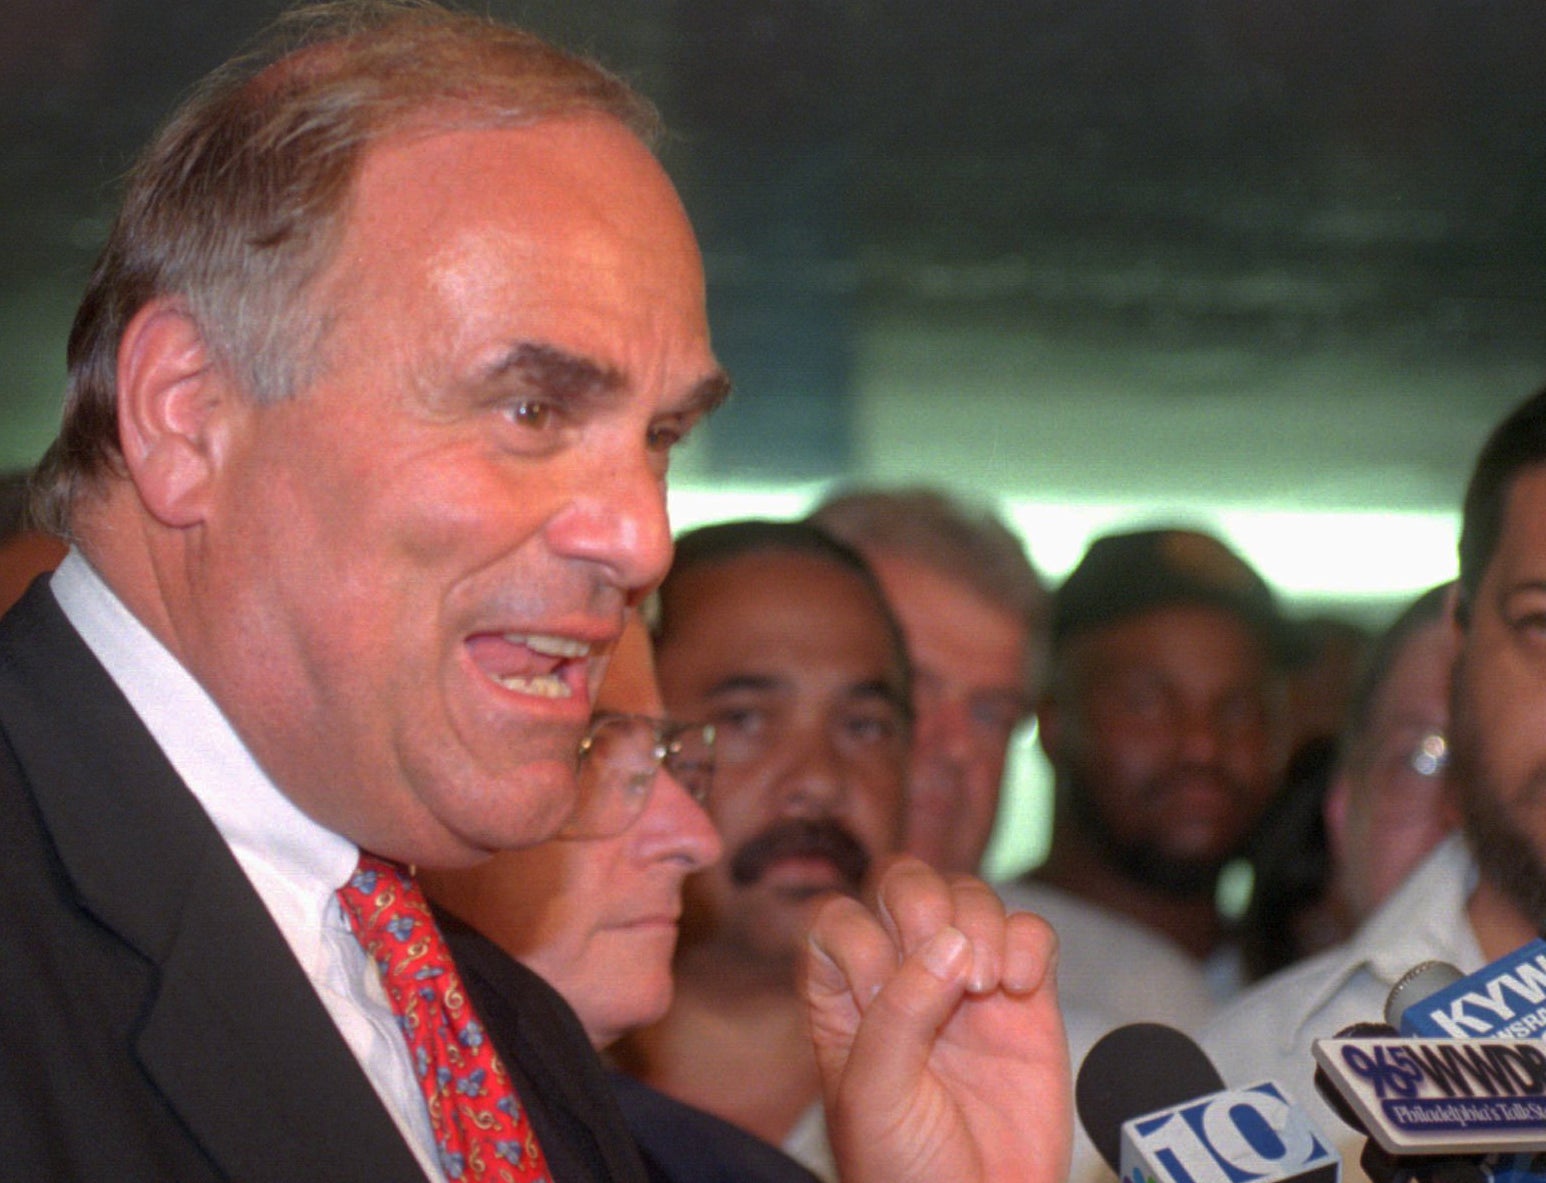  Then-Philadelphia-Mayor Ed Rendell speaks to reporters at the conclusion of the SEPTA strike in 1998. (AP Photo/Rusty Kennedy) 